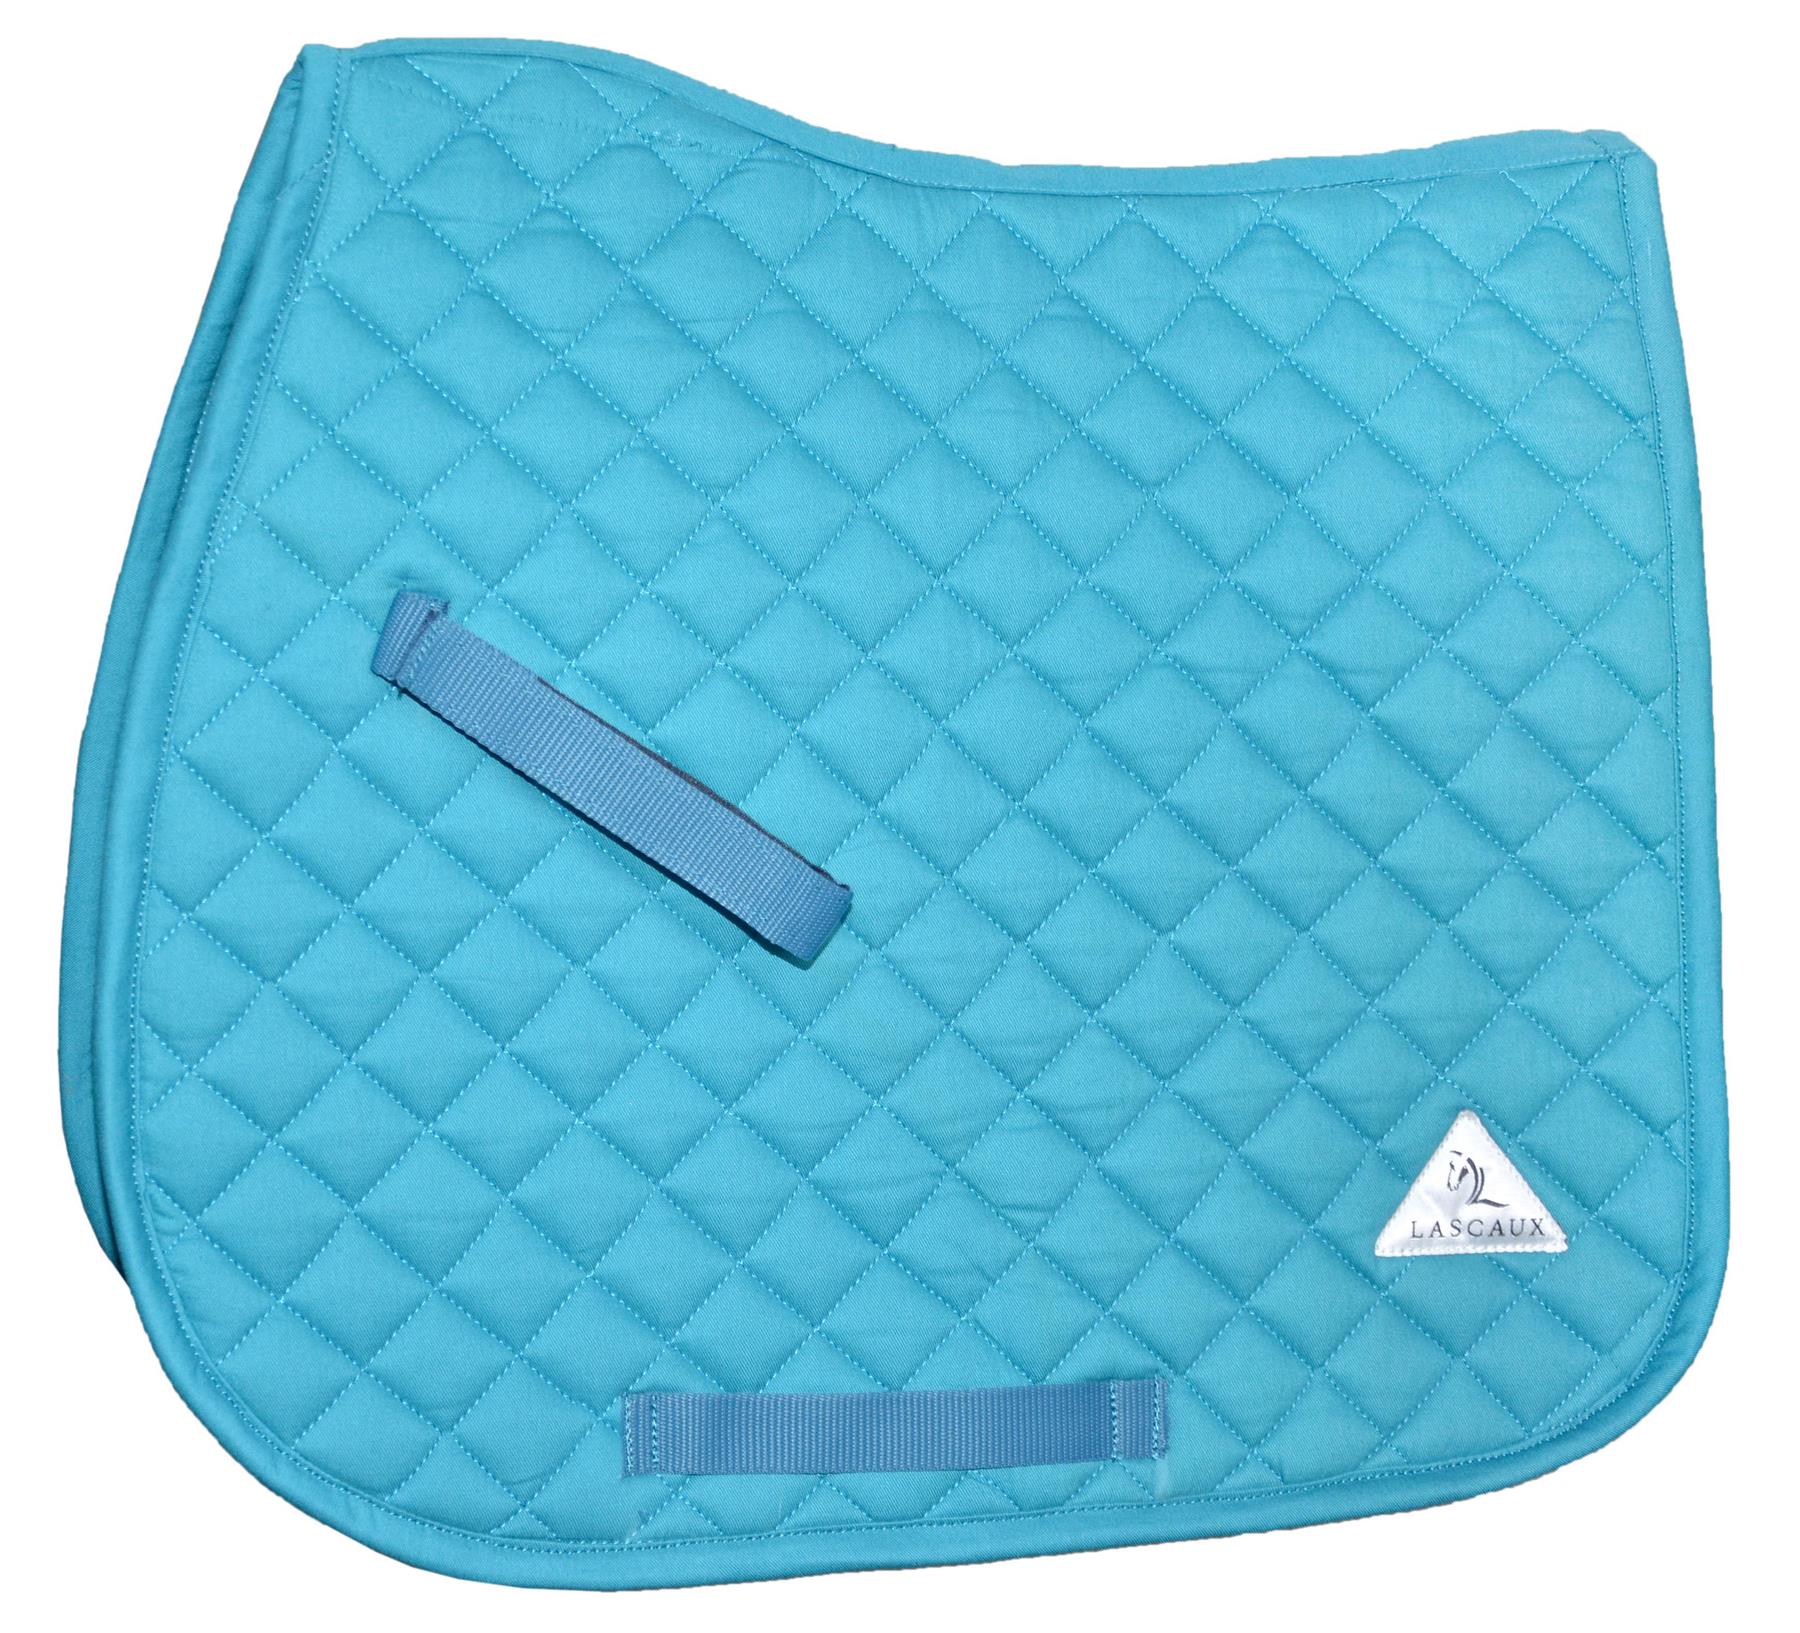 Diamond Quilted Saddlecloth Saddle Pads Numnah Jumping Event 6 Colours 2 Sizes - Tack24